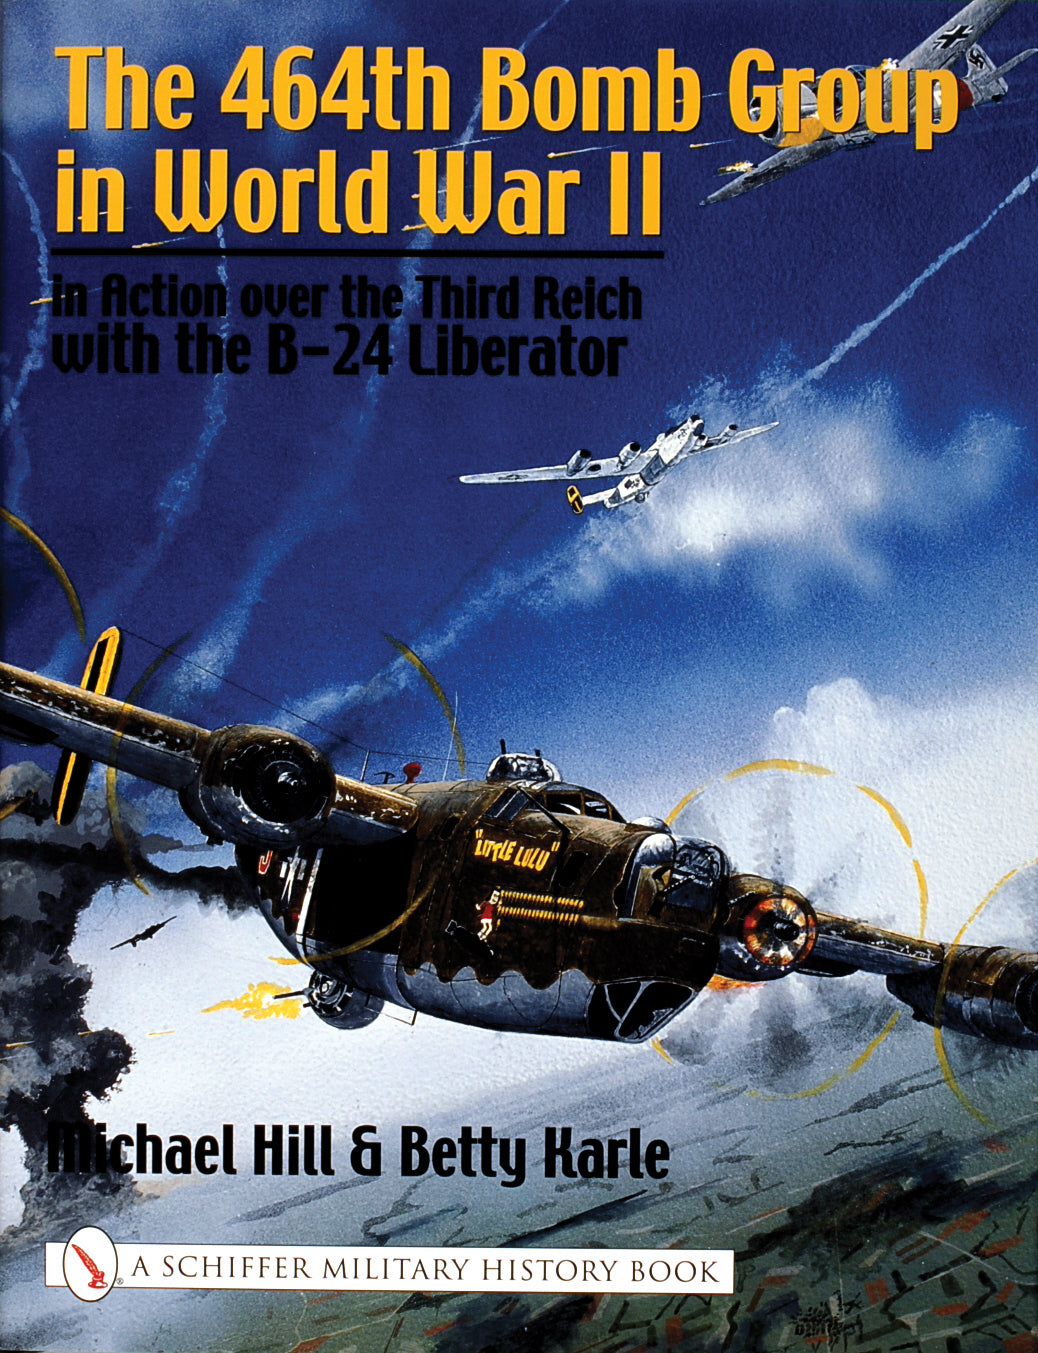 The 464th Bomb Group in World War II